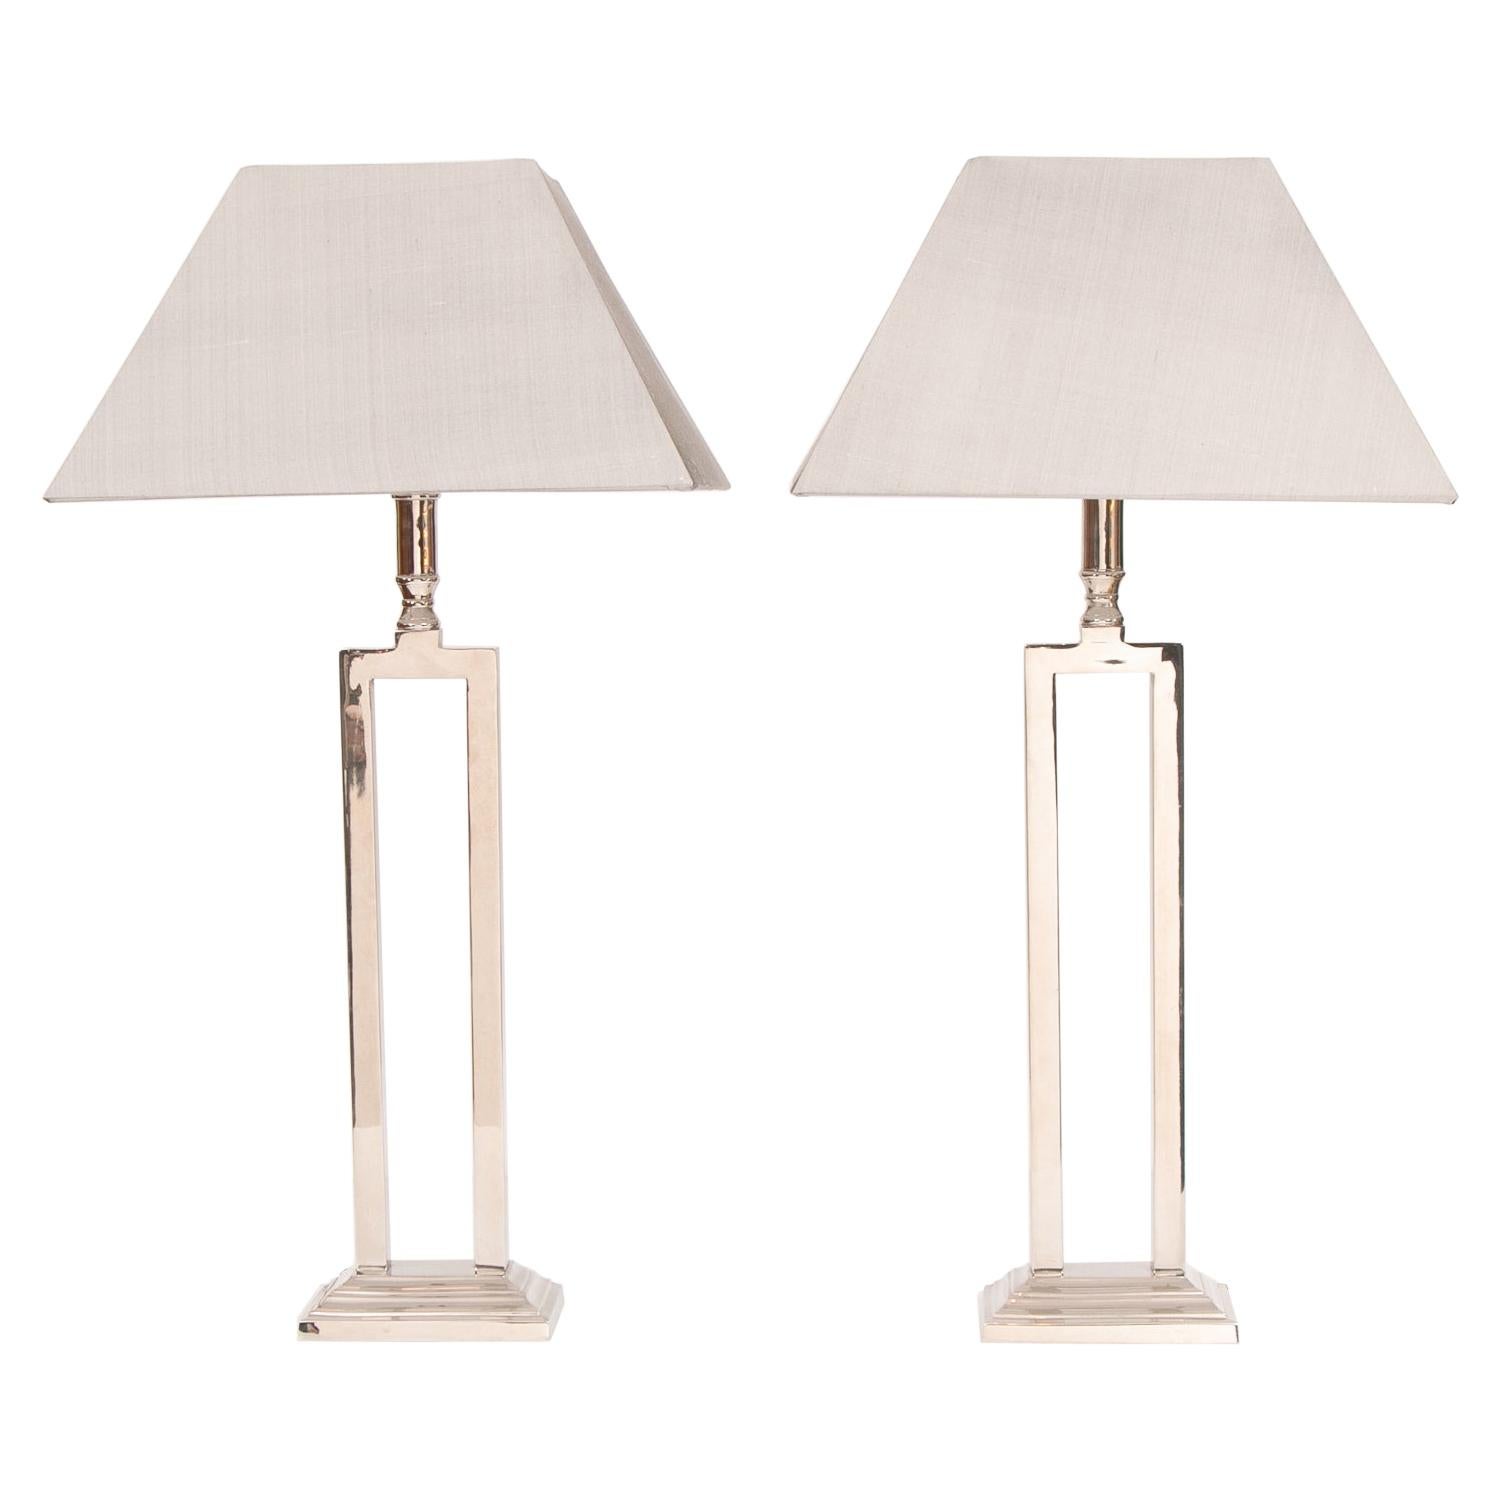 Pair of Decorative 1970s Chrome Side or Bedside Table Lamps Inc New Silk Shades